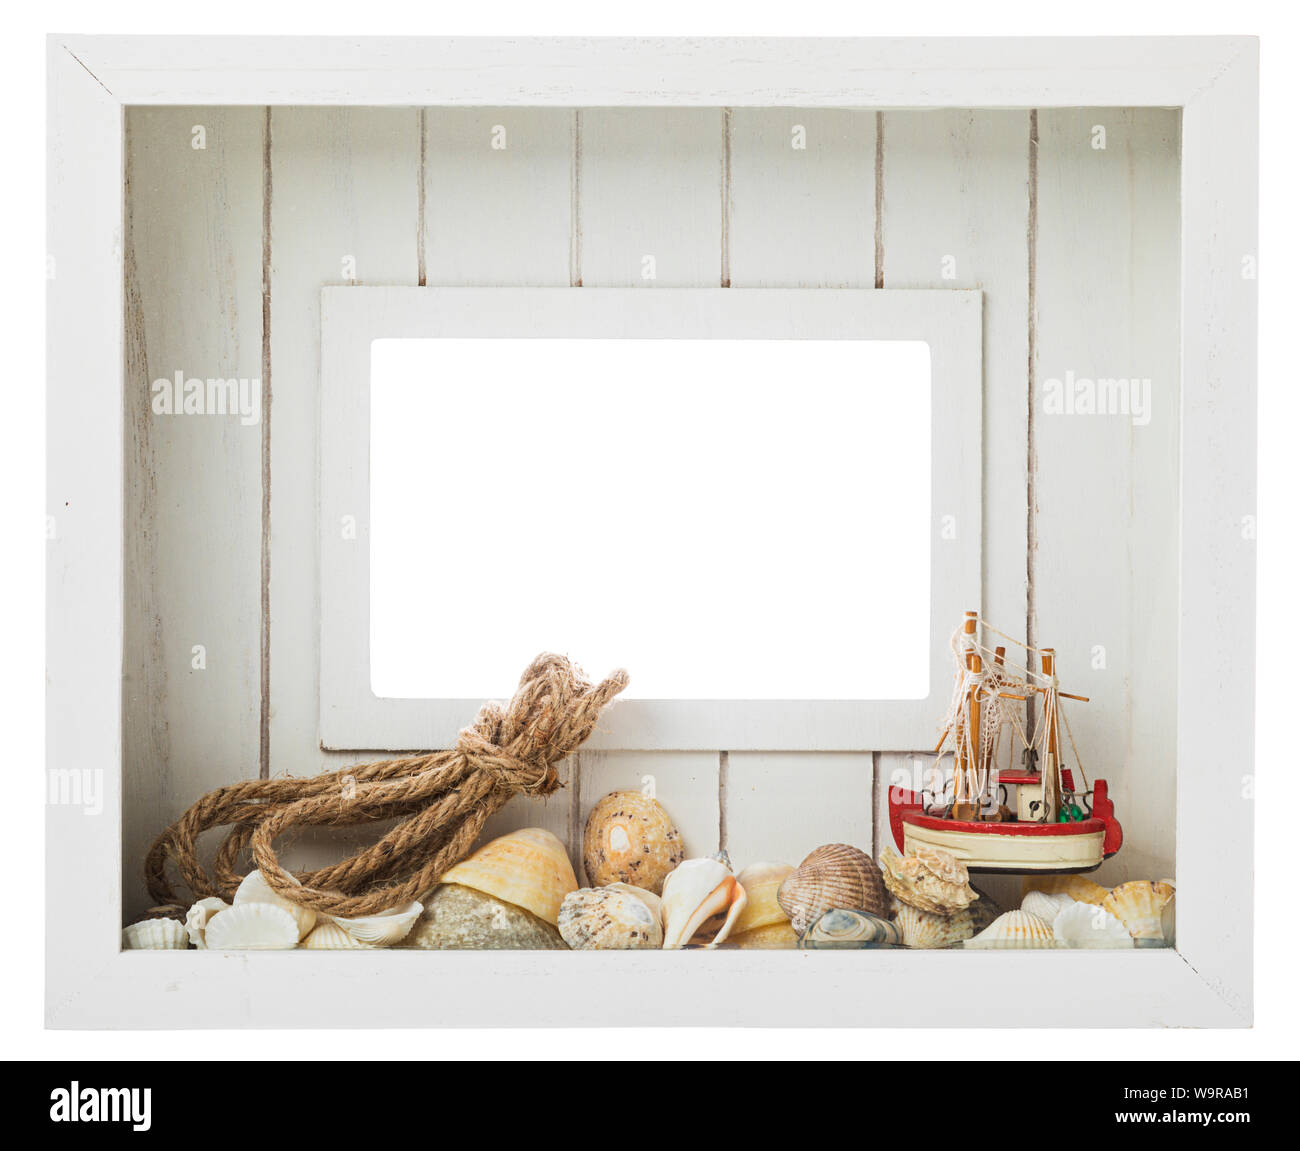 Wooden White Picture Frame With Maritime Decoration Like Sea